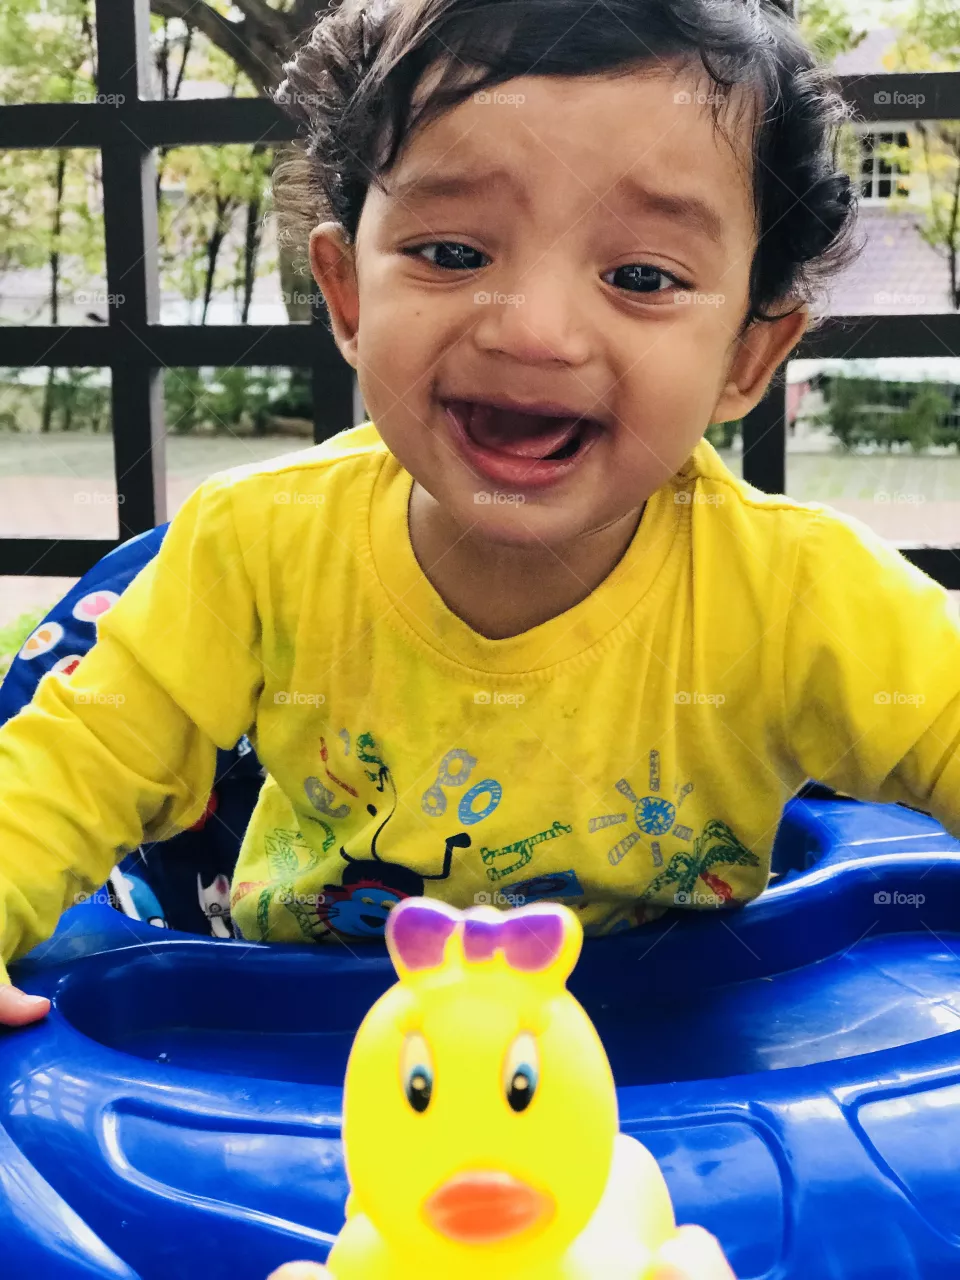 2 ducks, my baby is crying for duck, he wear yellow shirt like a duck, and he crying for get duck.